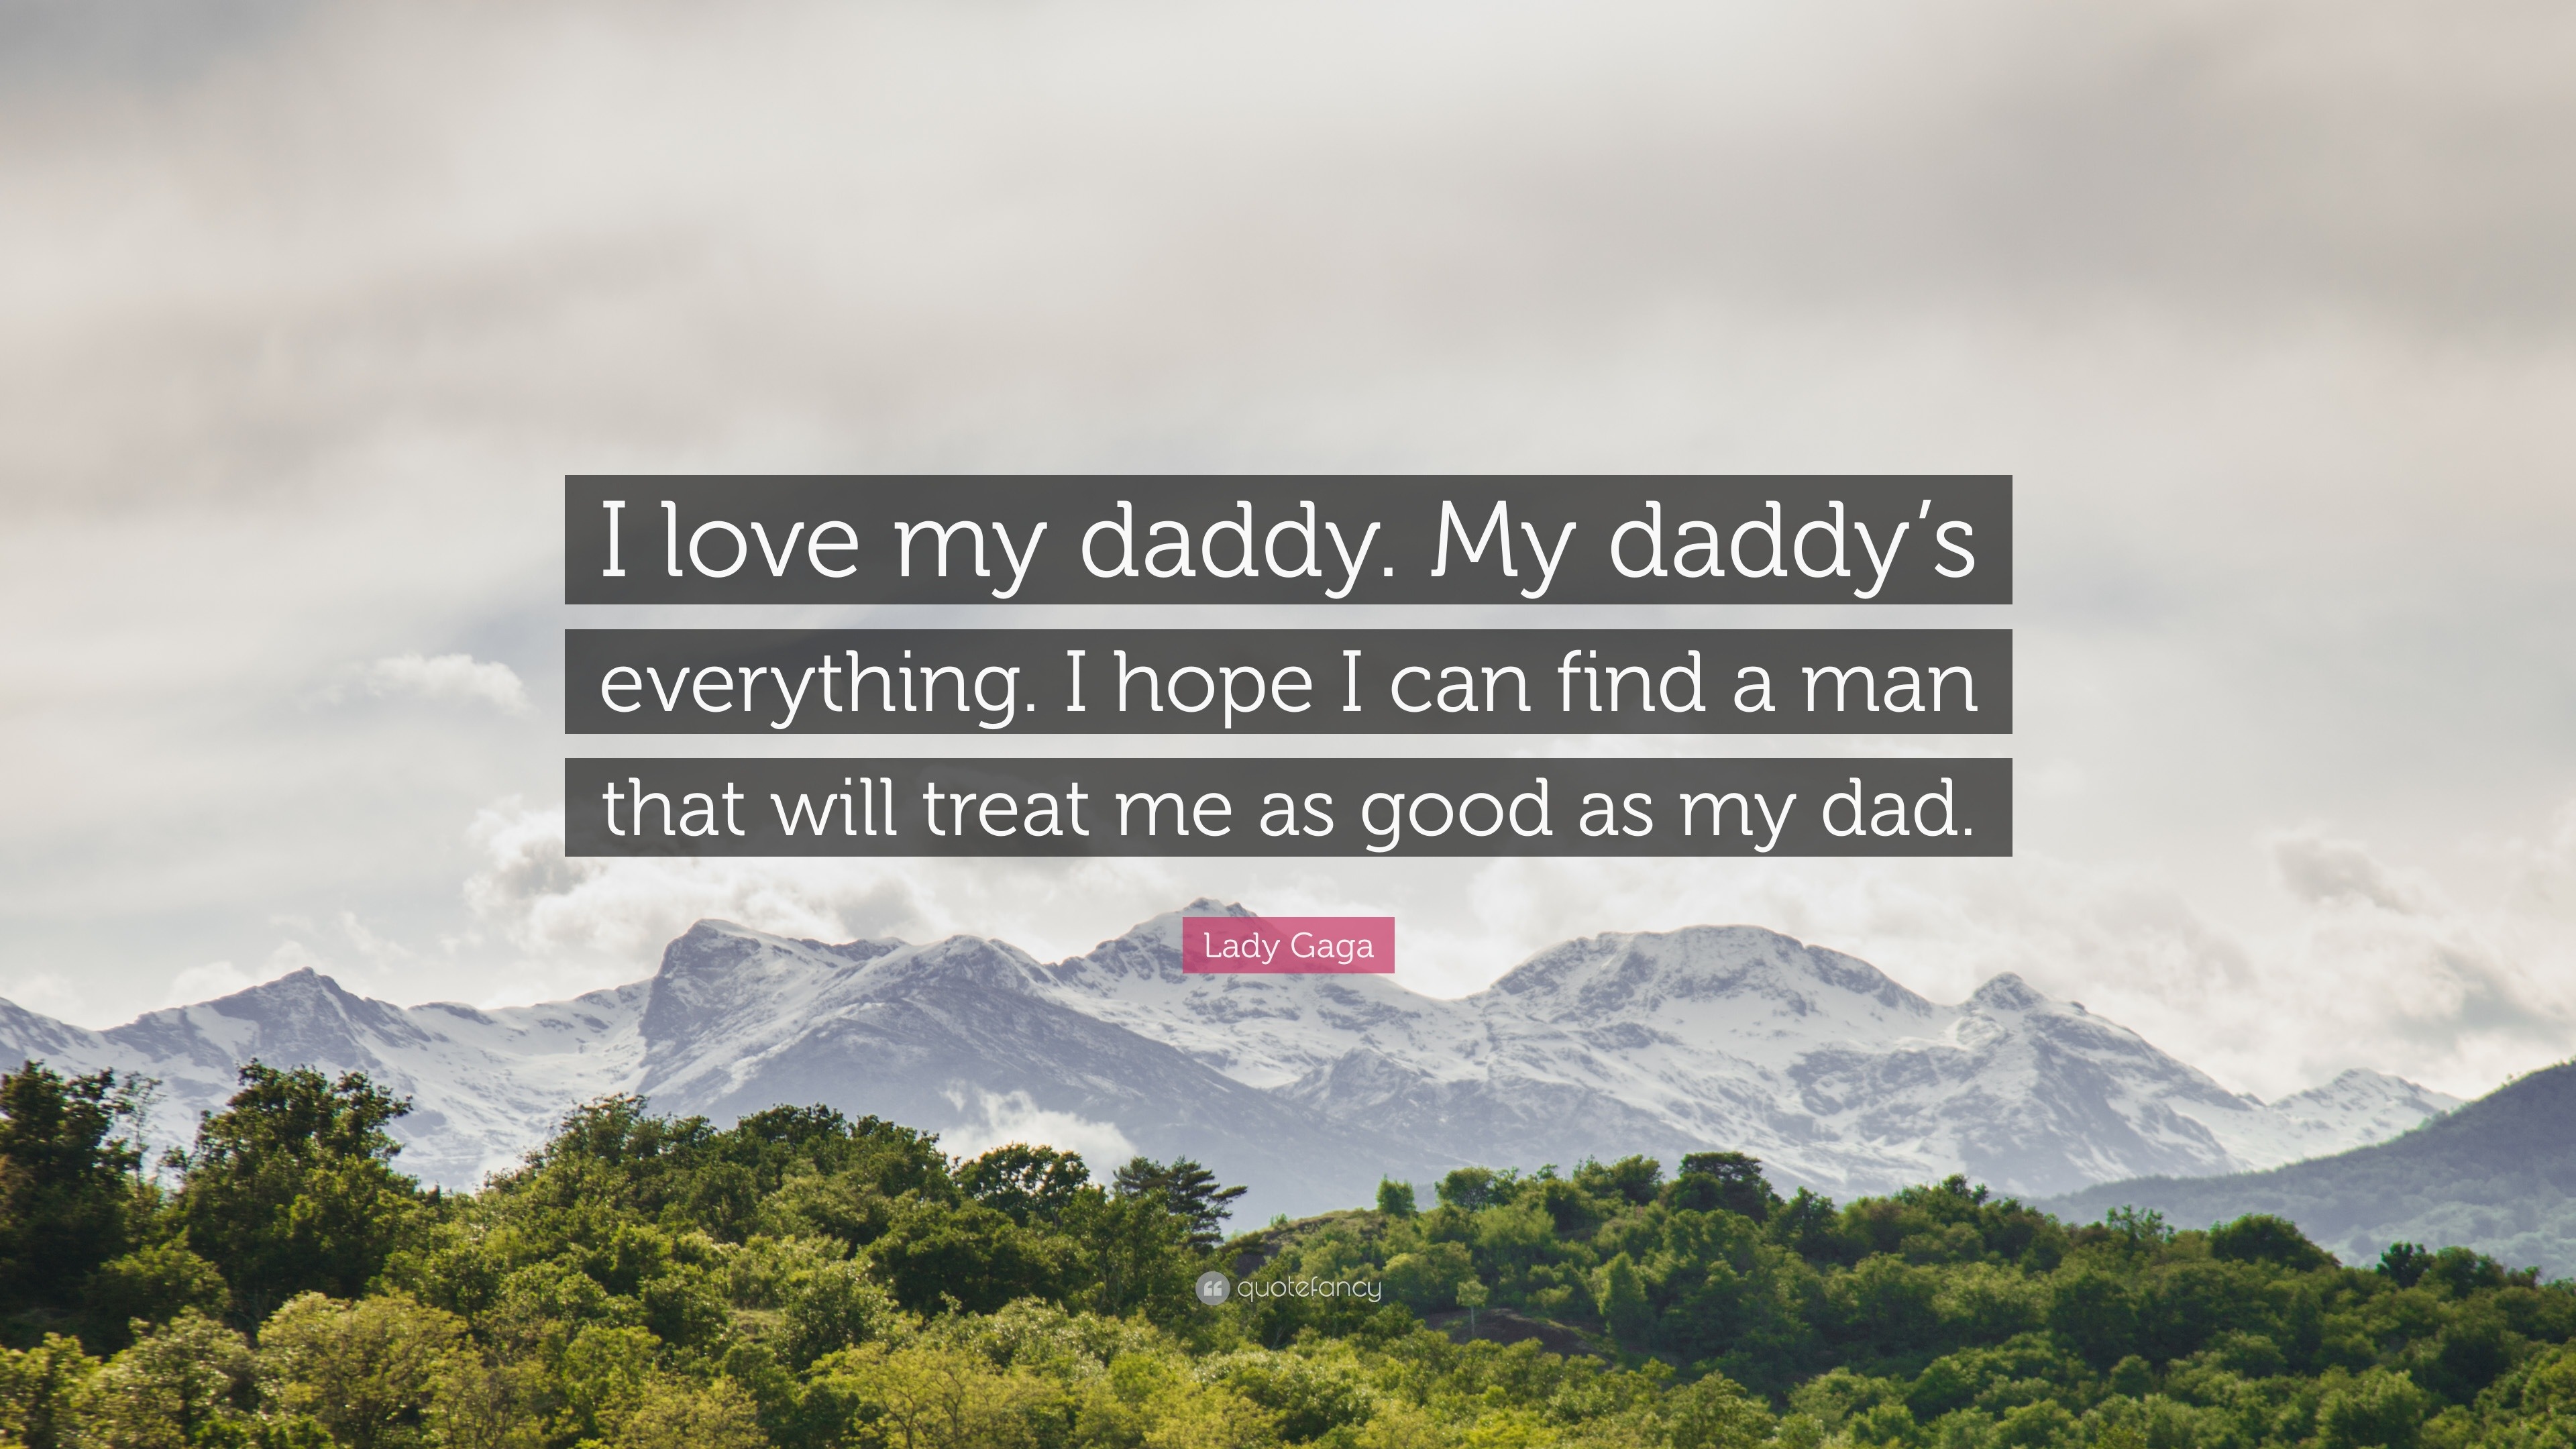 Lady Gaga Quote “I love my daddy My daddy s everything I hope